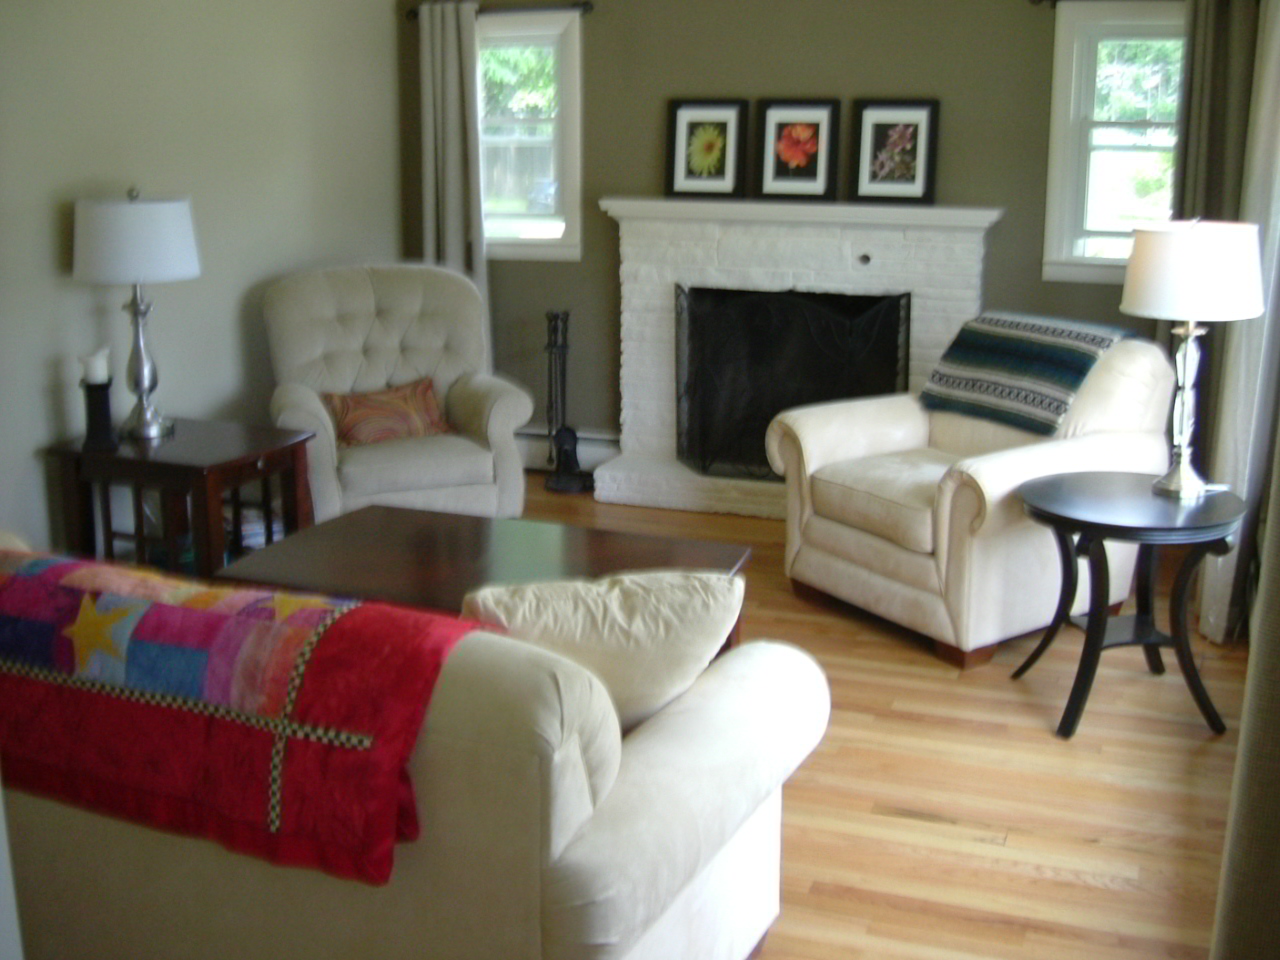 the room has a chair, couch, ottoman and fire place in it